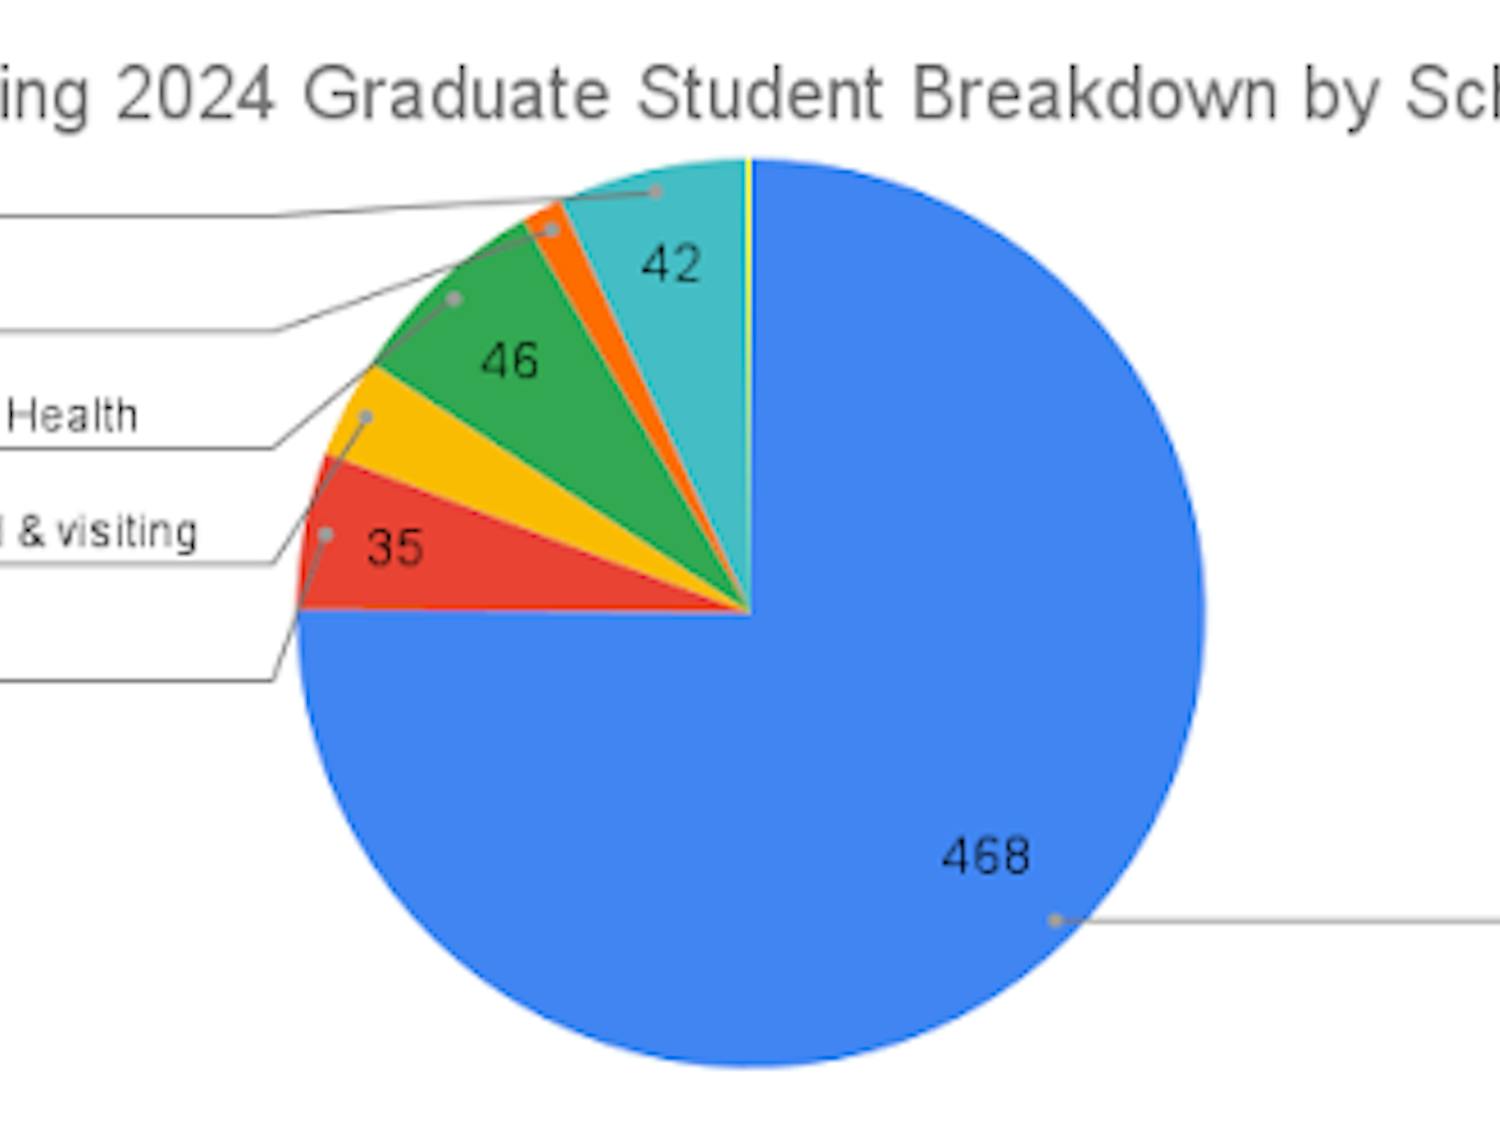 Education graduate and certificate programs make up a vast majority of the graduate students at the College. The yellow sliver represents the single student in the Professional and UX/UI Writing Certificate program (Graph by Mike Sherr).